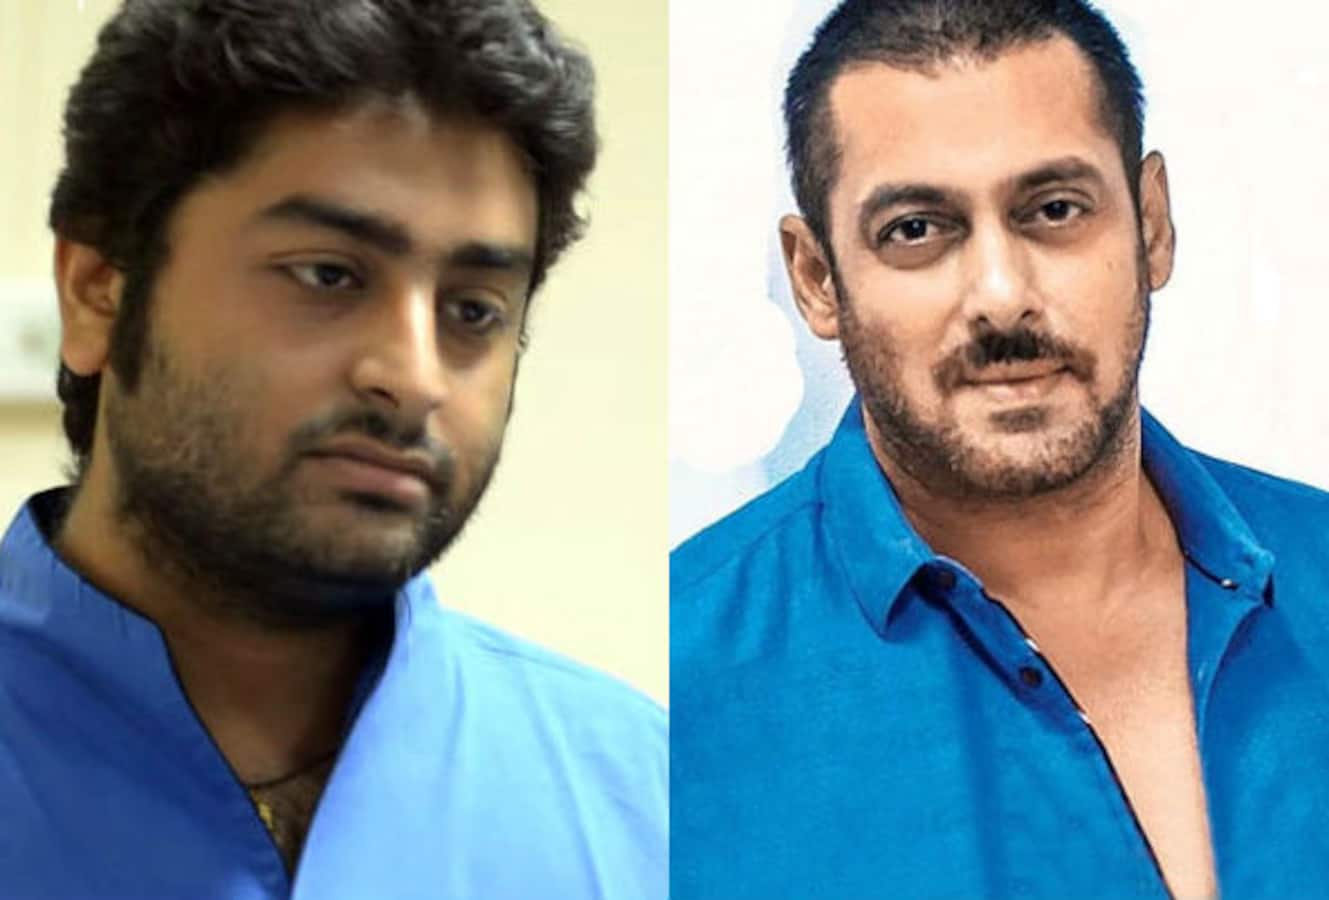 Omg! Arijit Singh to now visit Salman Khan's house and BEG for forgiveness!